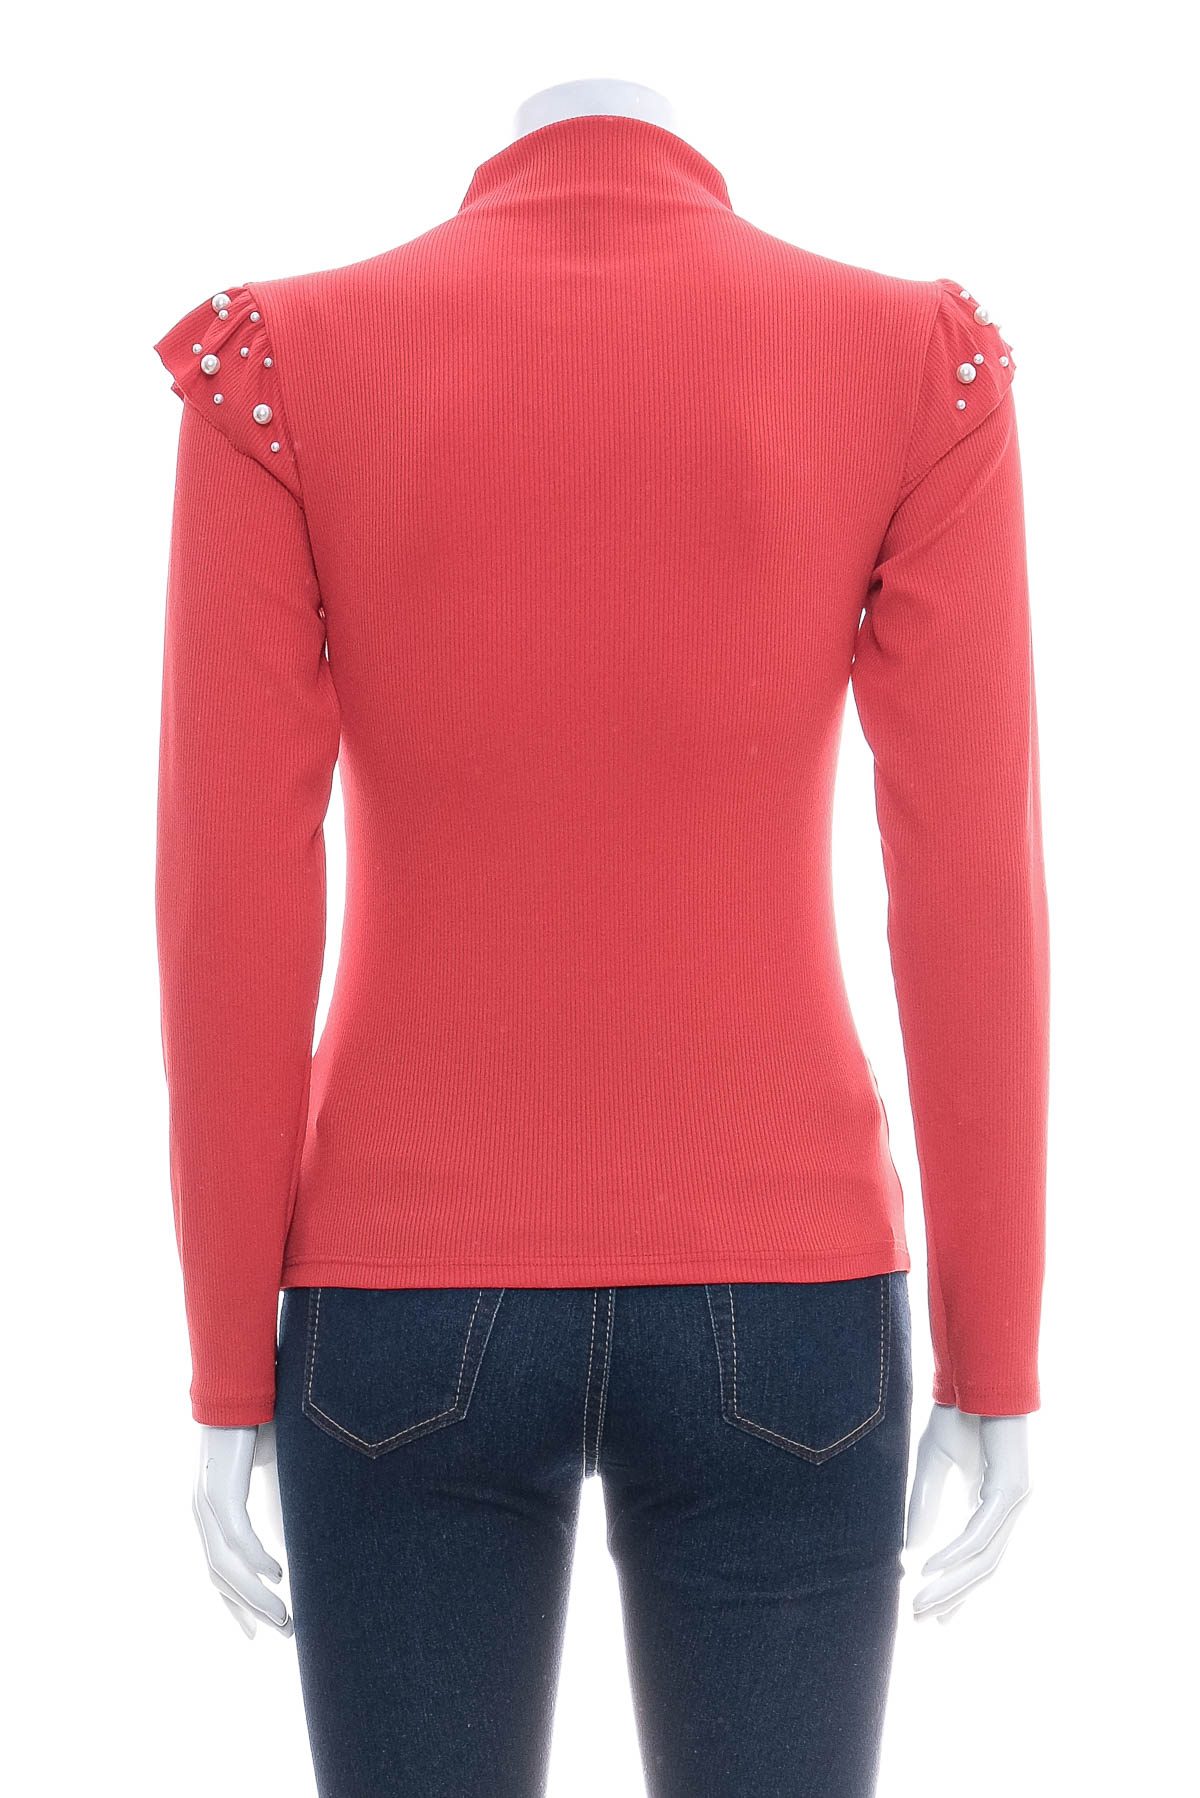 Women's blouse - NEW COLLECTION - 1